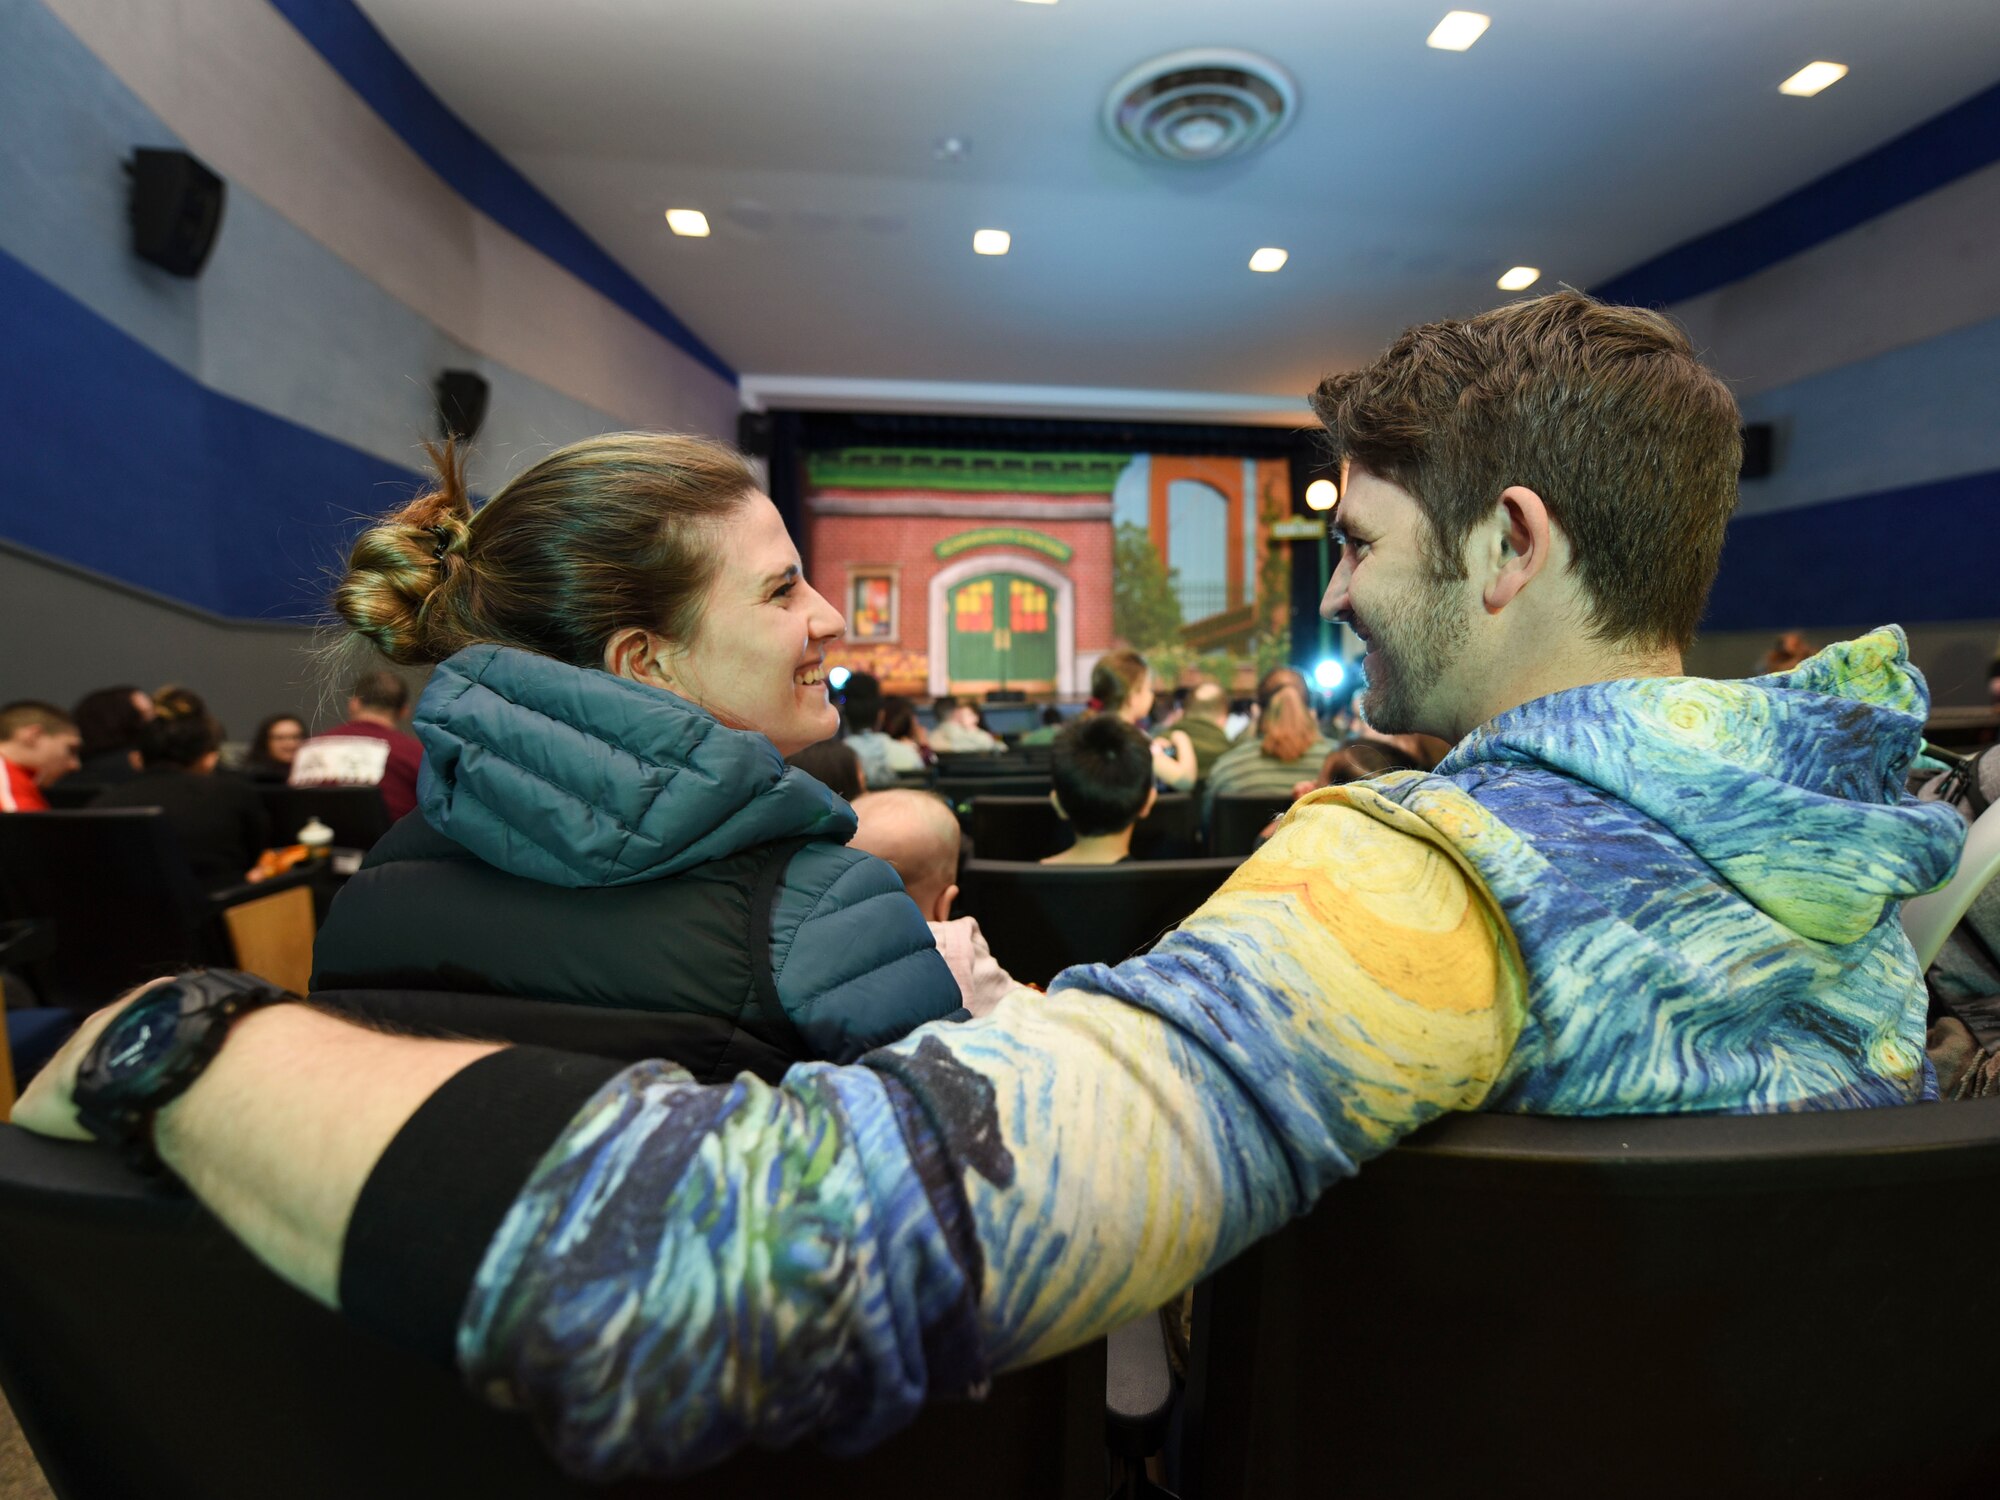 Captain Shane Coleman, 348th Reconnaissance Squadron R-Q 4 Global Hawk pilot, and his wife, Natalie Coleman, wait for the production of Sesame Street Live to begin on March 26, 2019, on Grand Forks Air Force Base, North Dakota. Natalie enjoyed the performance, and thought having Sesame Street Live come to Grand Forks AFB was a great idea for families with children. (U.S. Air Force photo by Airman 1st Class Melody Wolff)